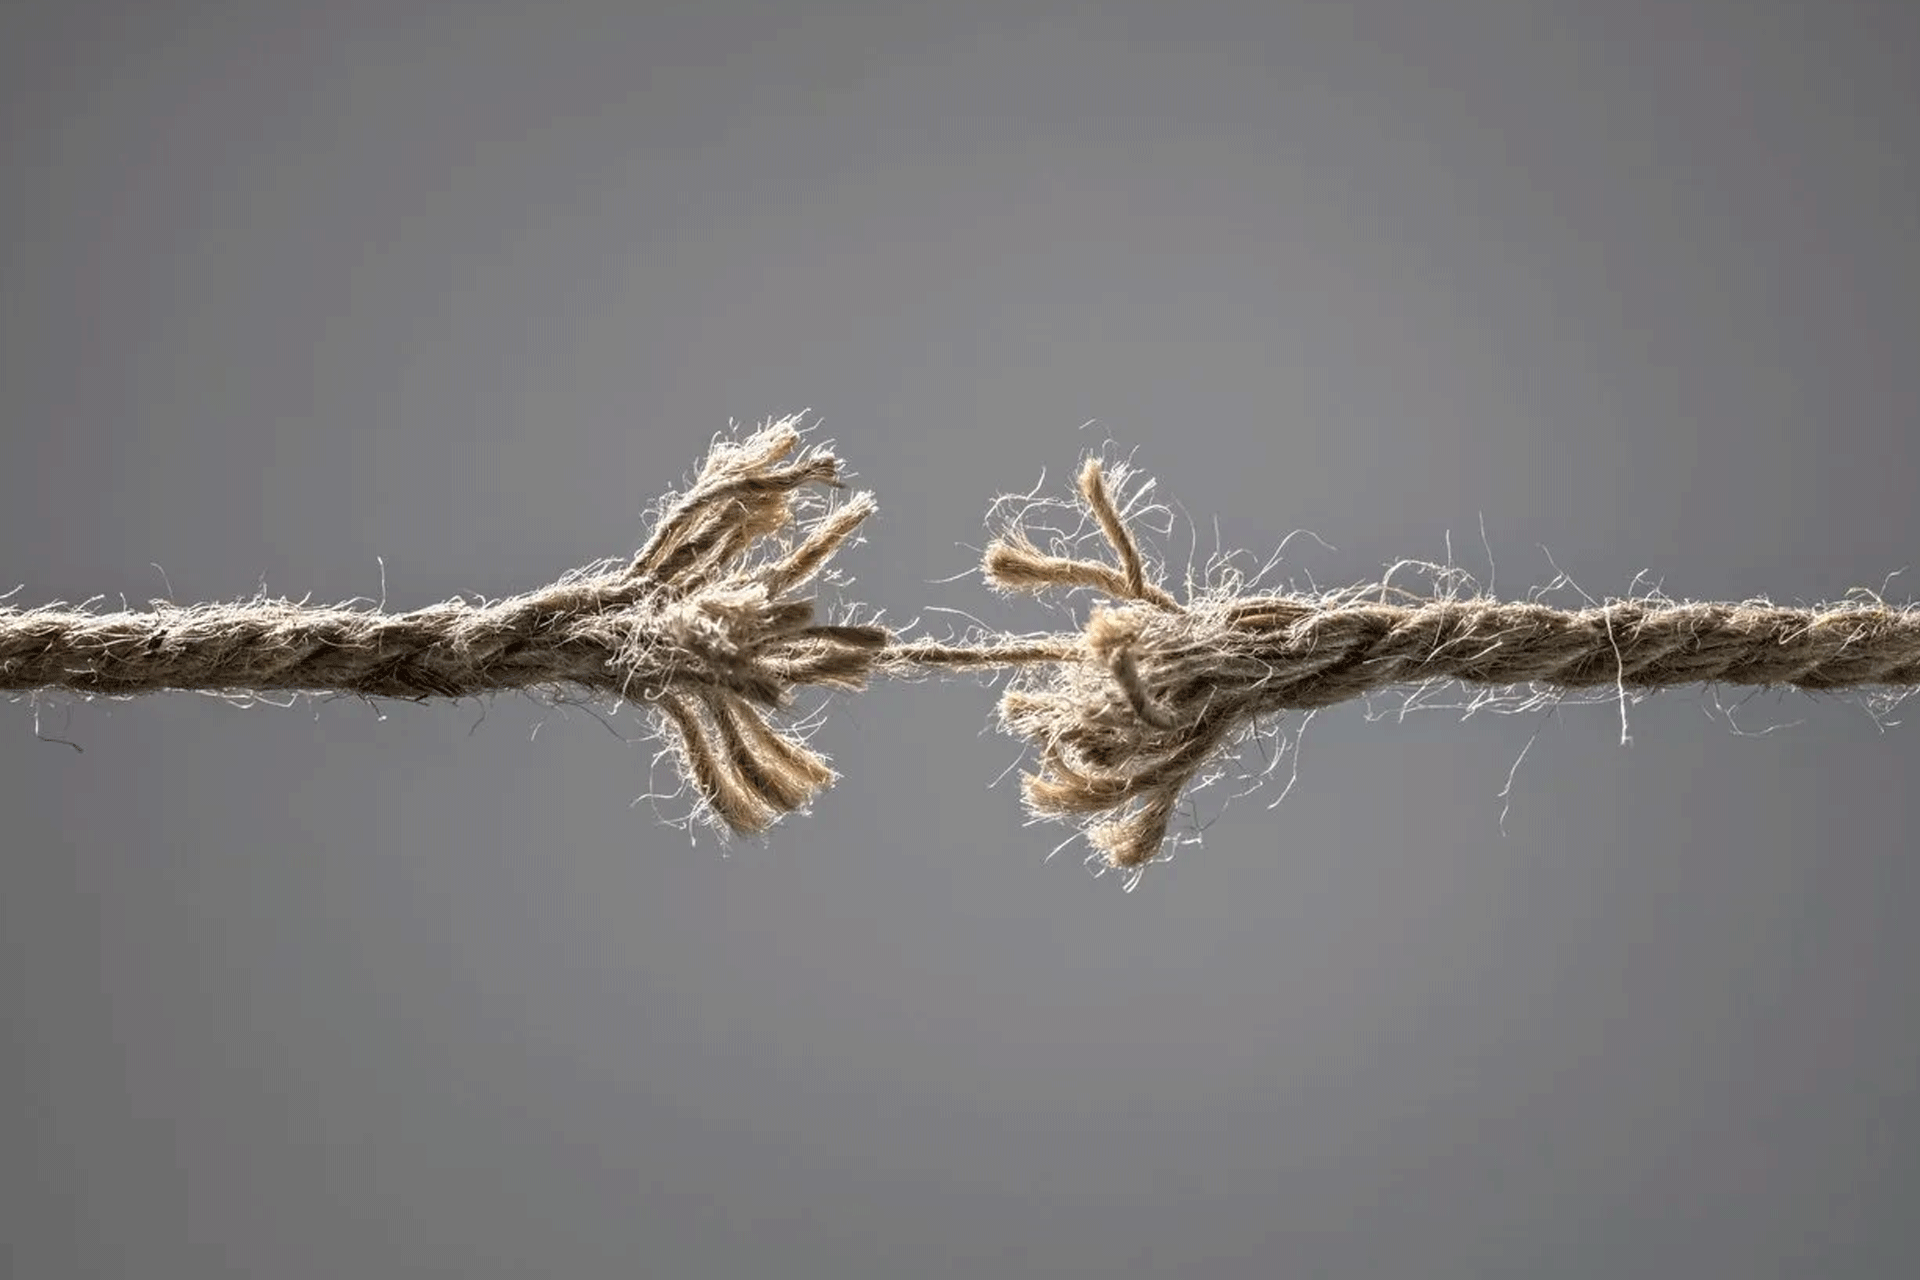 An image of a frayed rope about to break